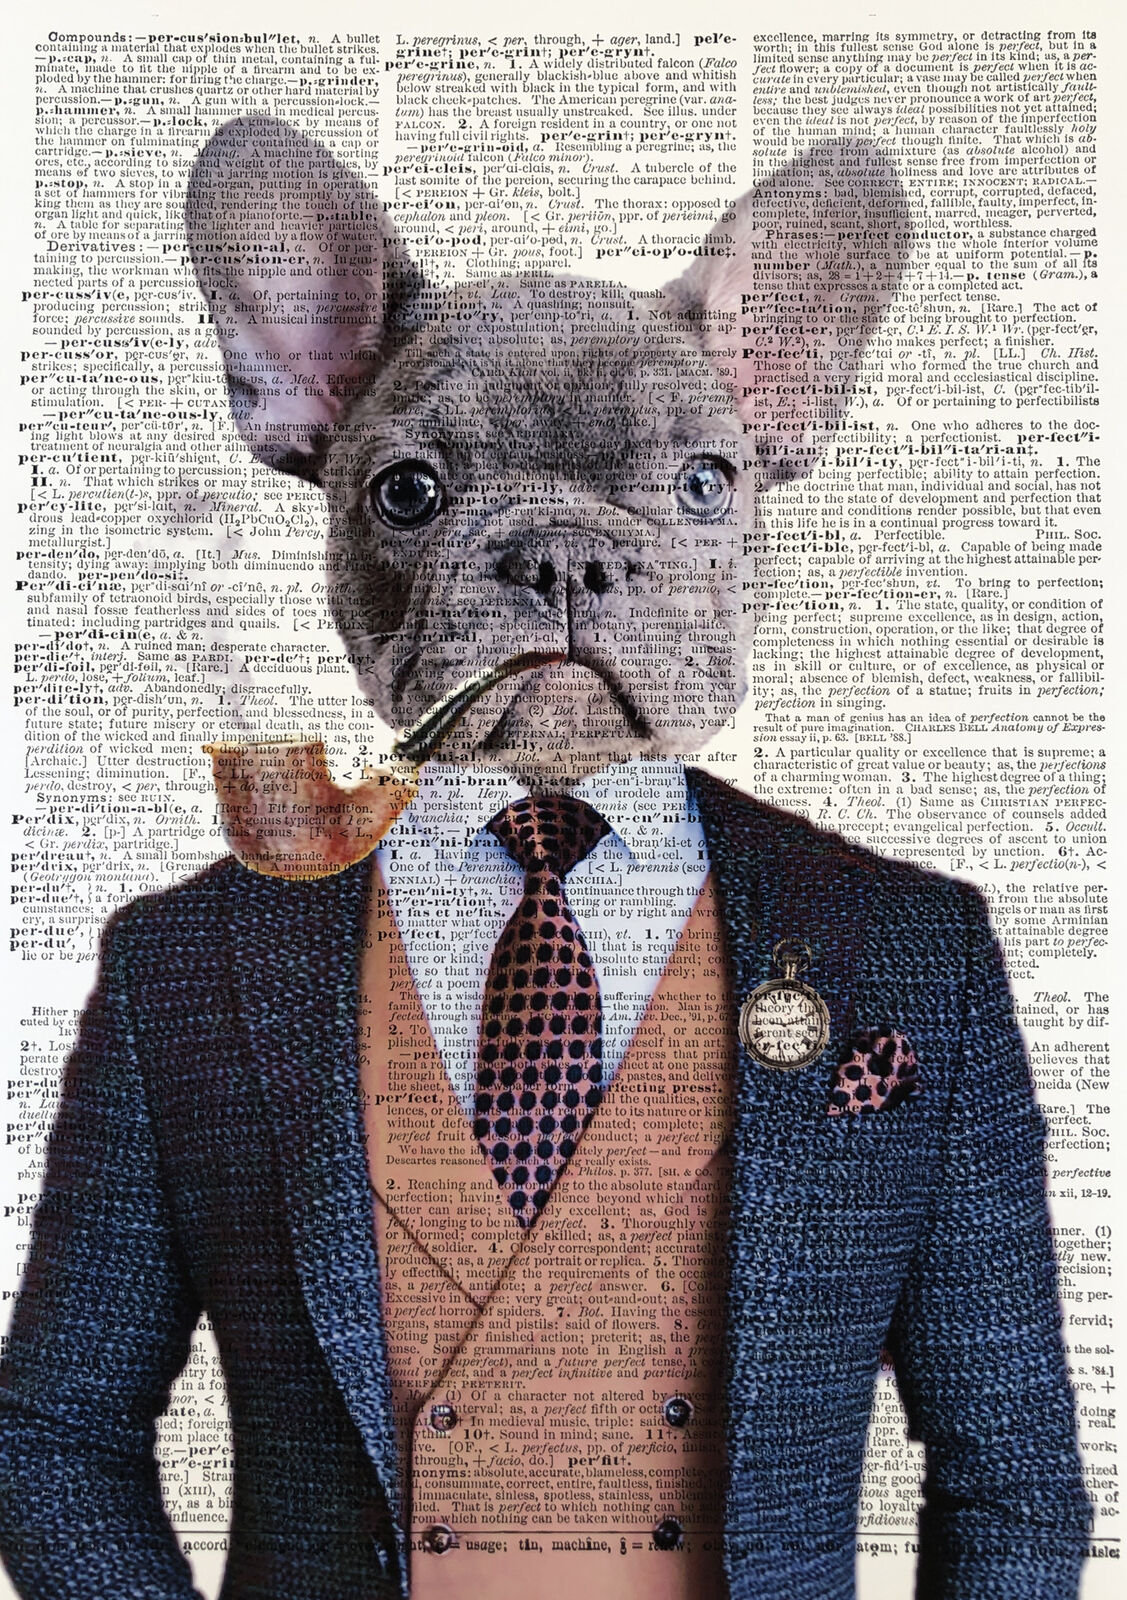 Maturi A3 Blue French Bulldog Frenchie Print - Regal Dog In Suit Picture -  Humanised Animal In Clothes 